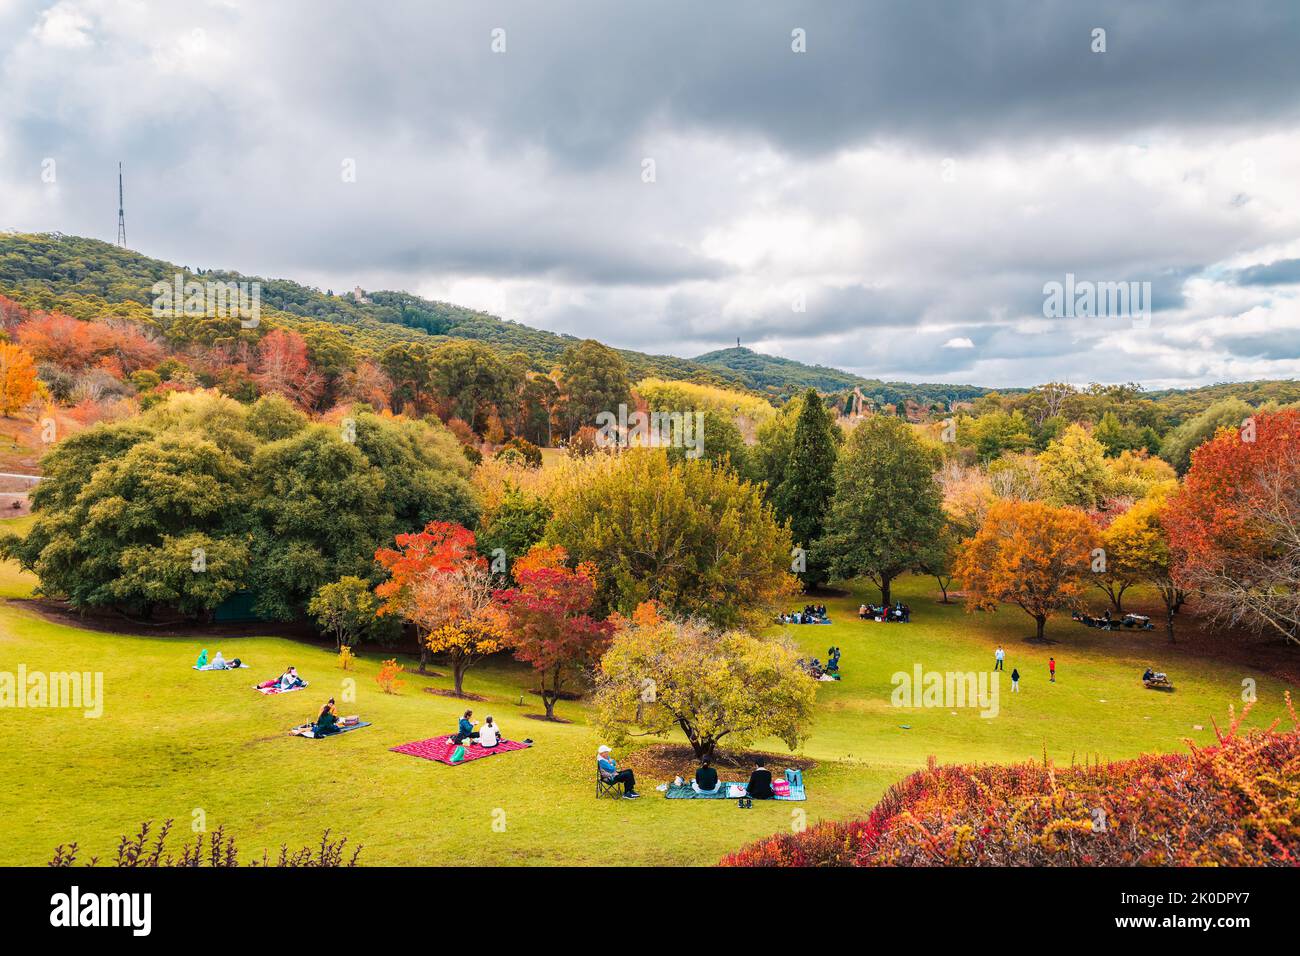 Crafers, South Australia - May 1, 2022: Mount Lofty Botanic Garden with people having picnic on a day during autumn season Stock Photo